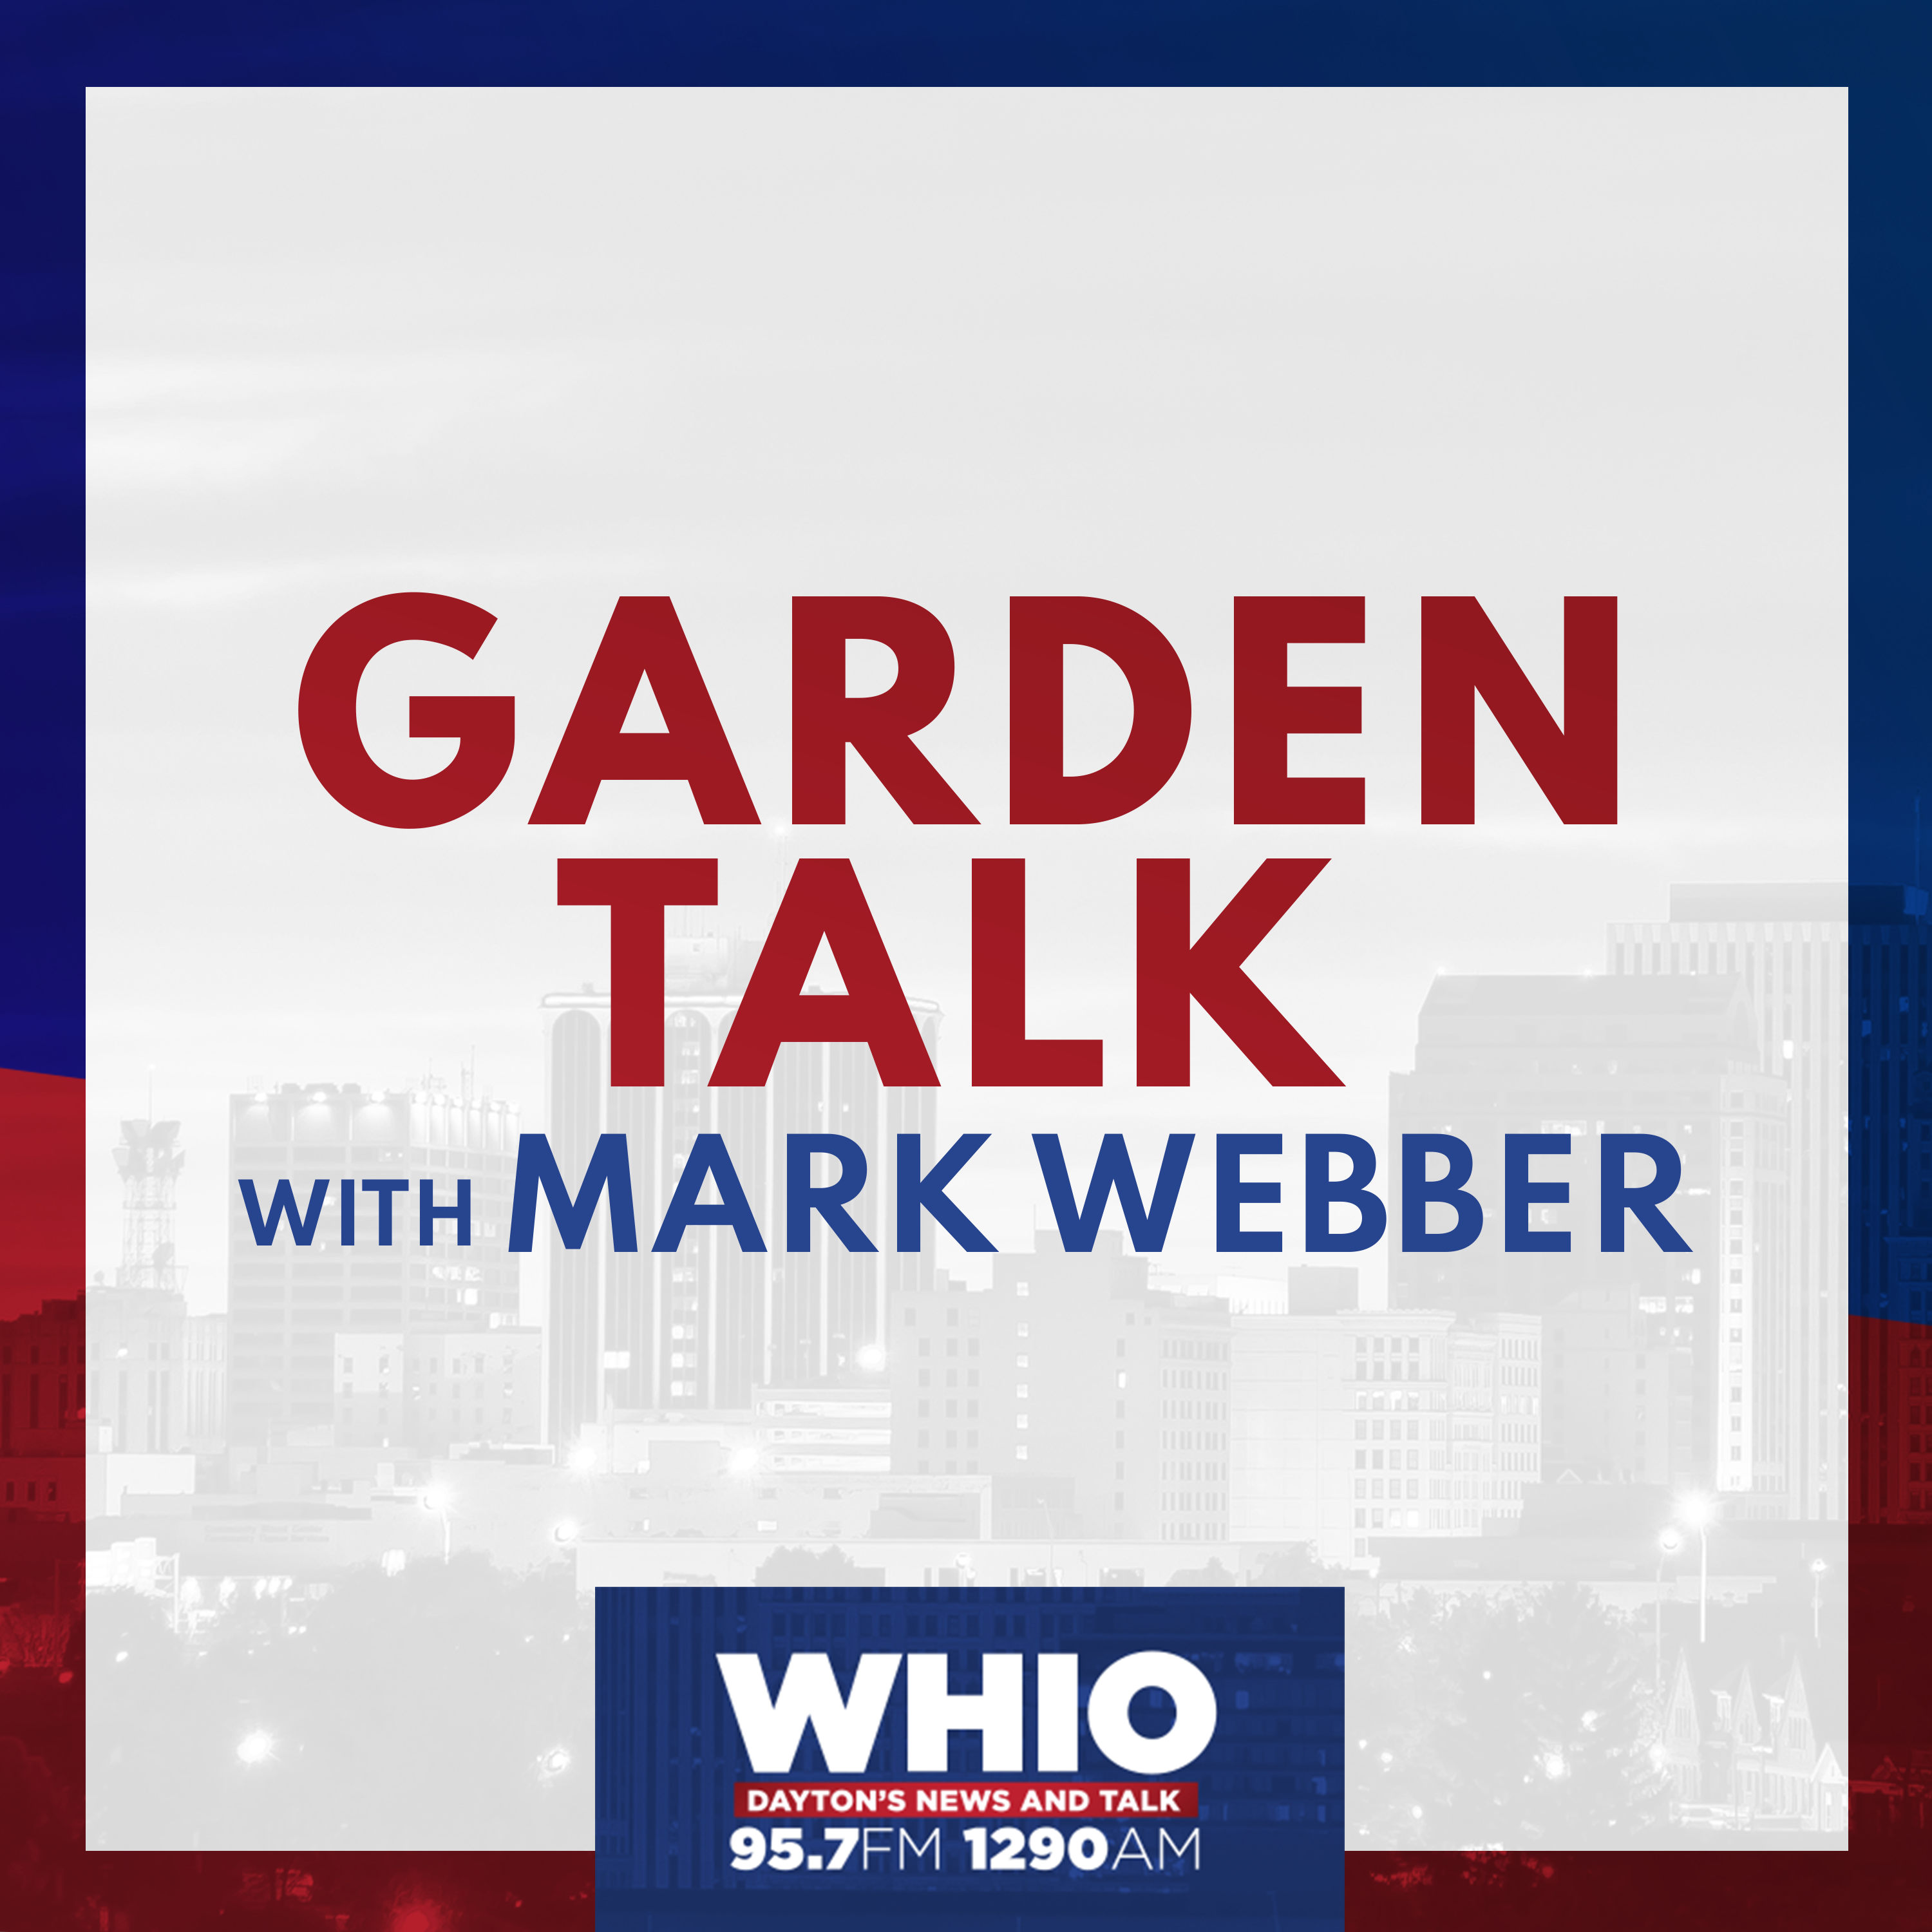 Garden Talk with Mark Webber: Hour 1 from Saturday, September 12th, 2015